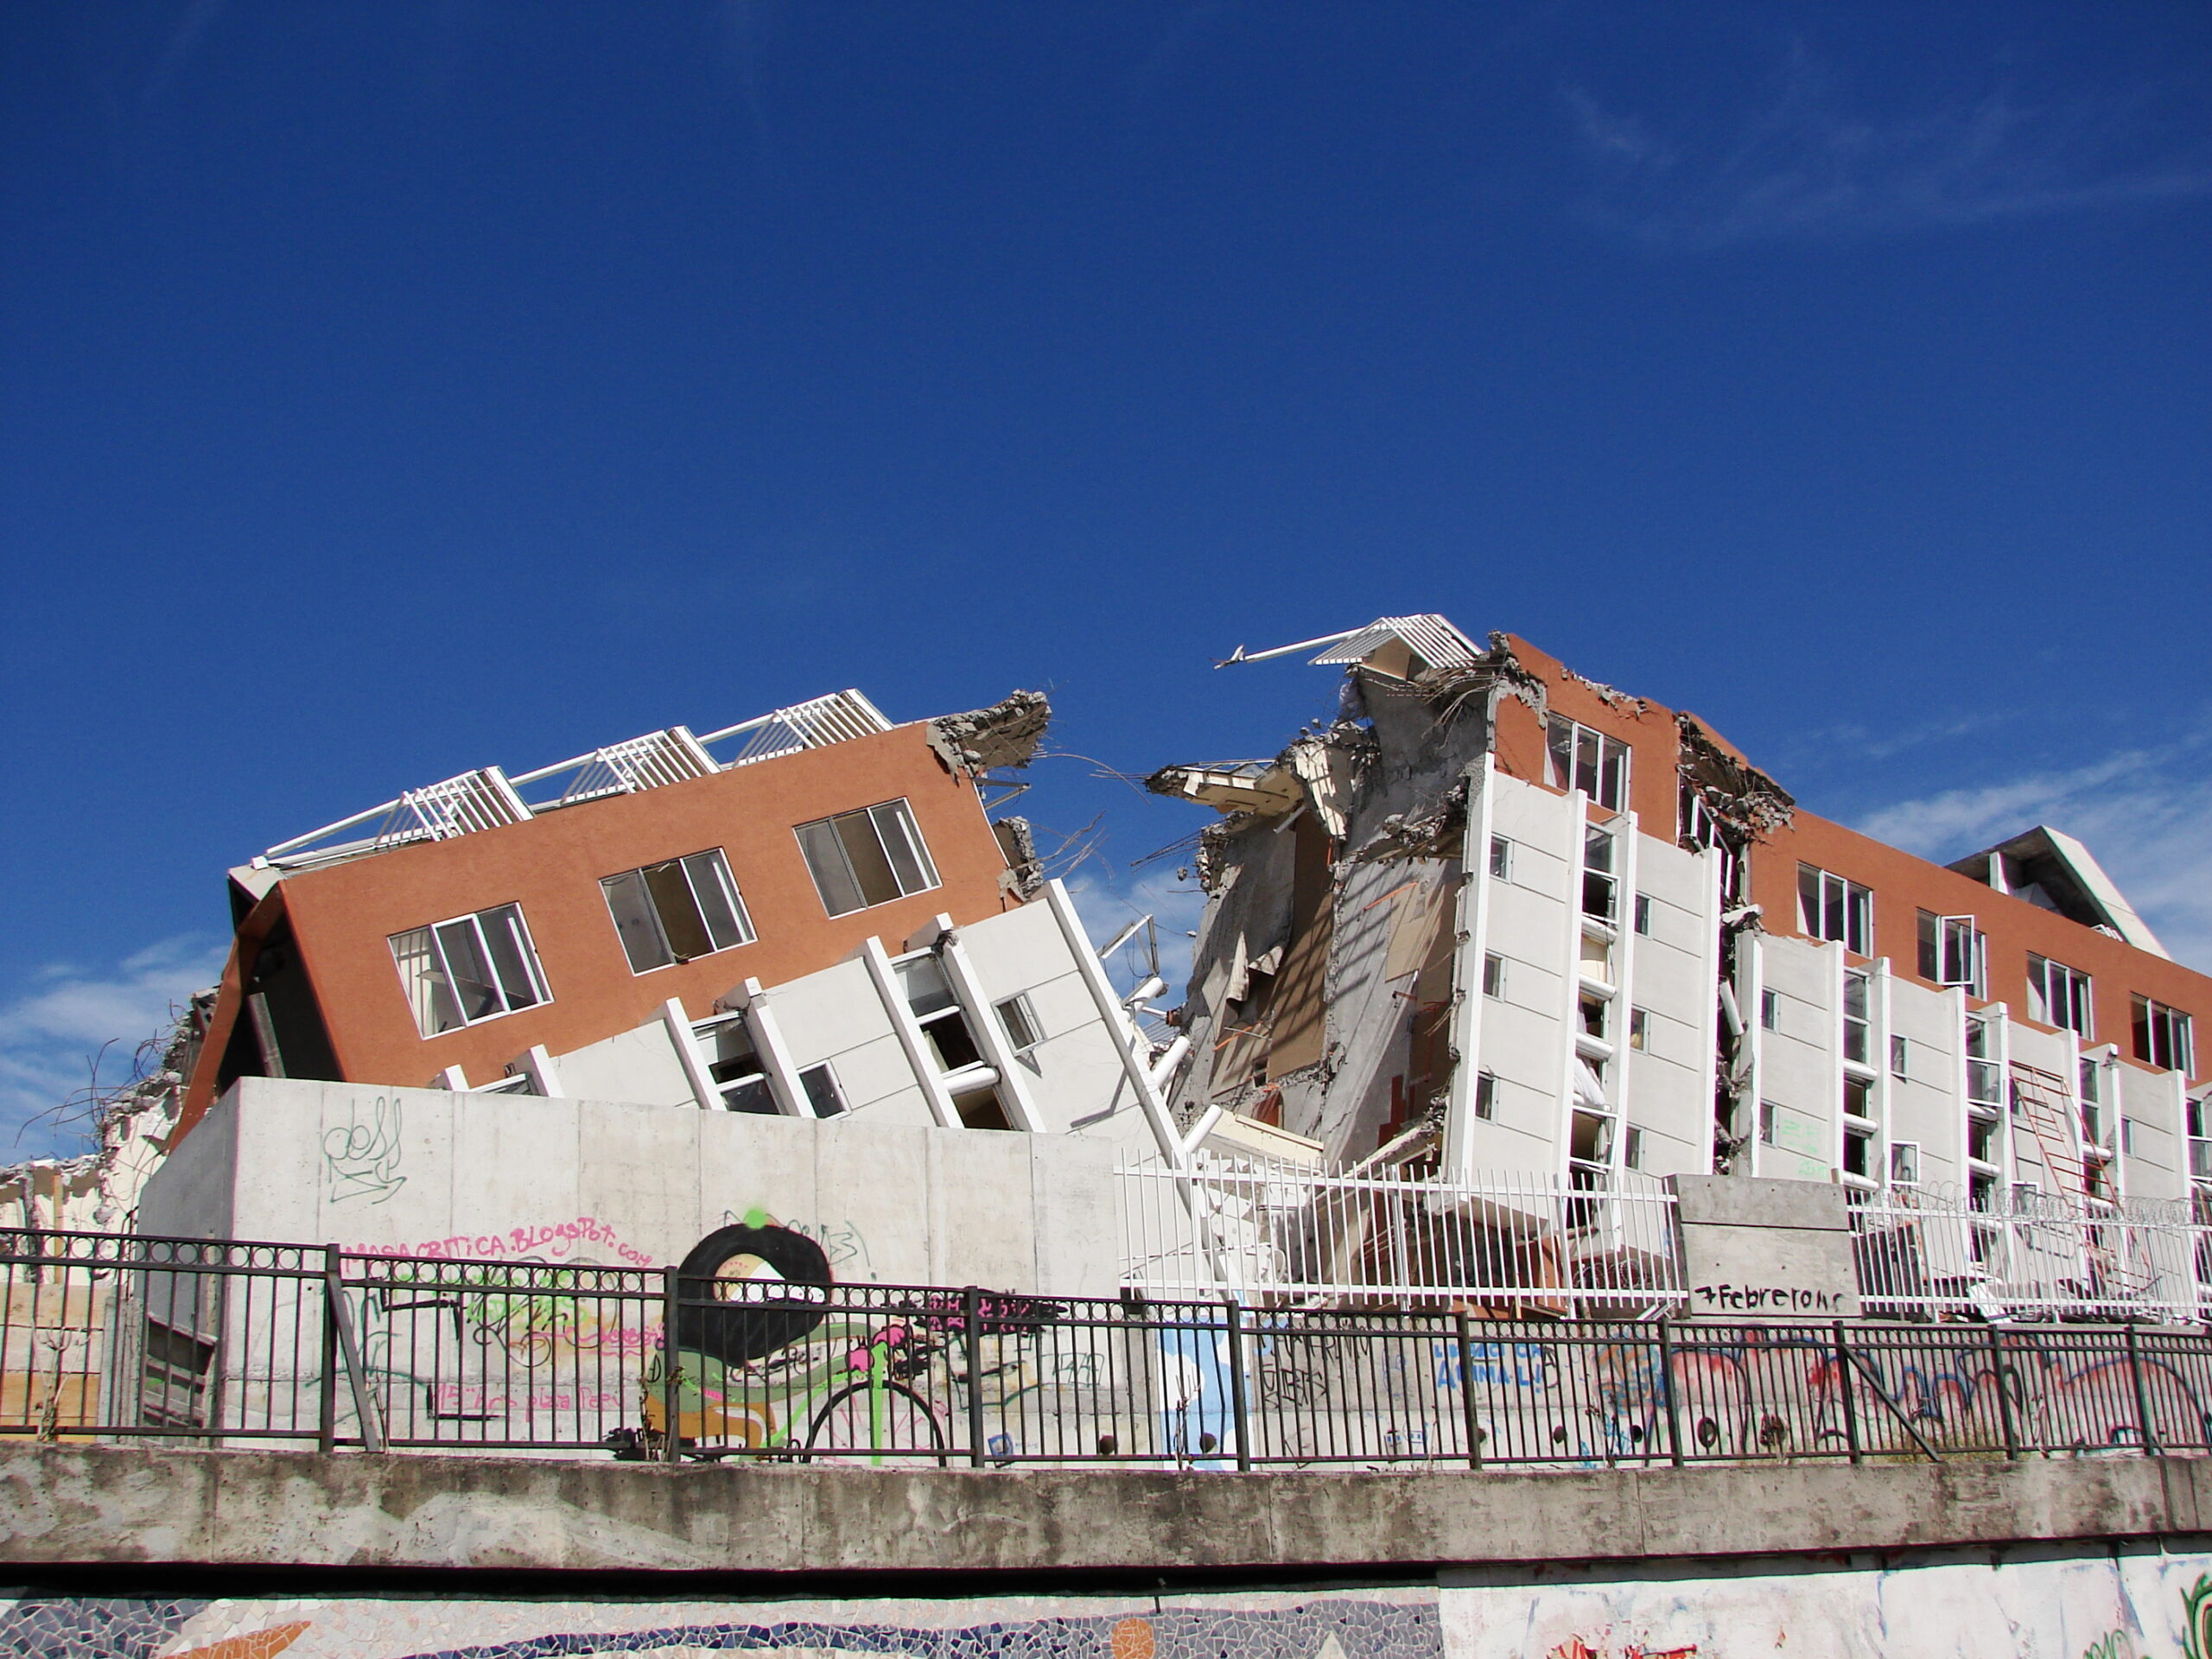 The four-storey apartment block is split in two with both sides showing major damage.